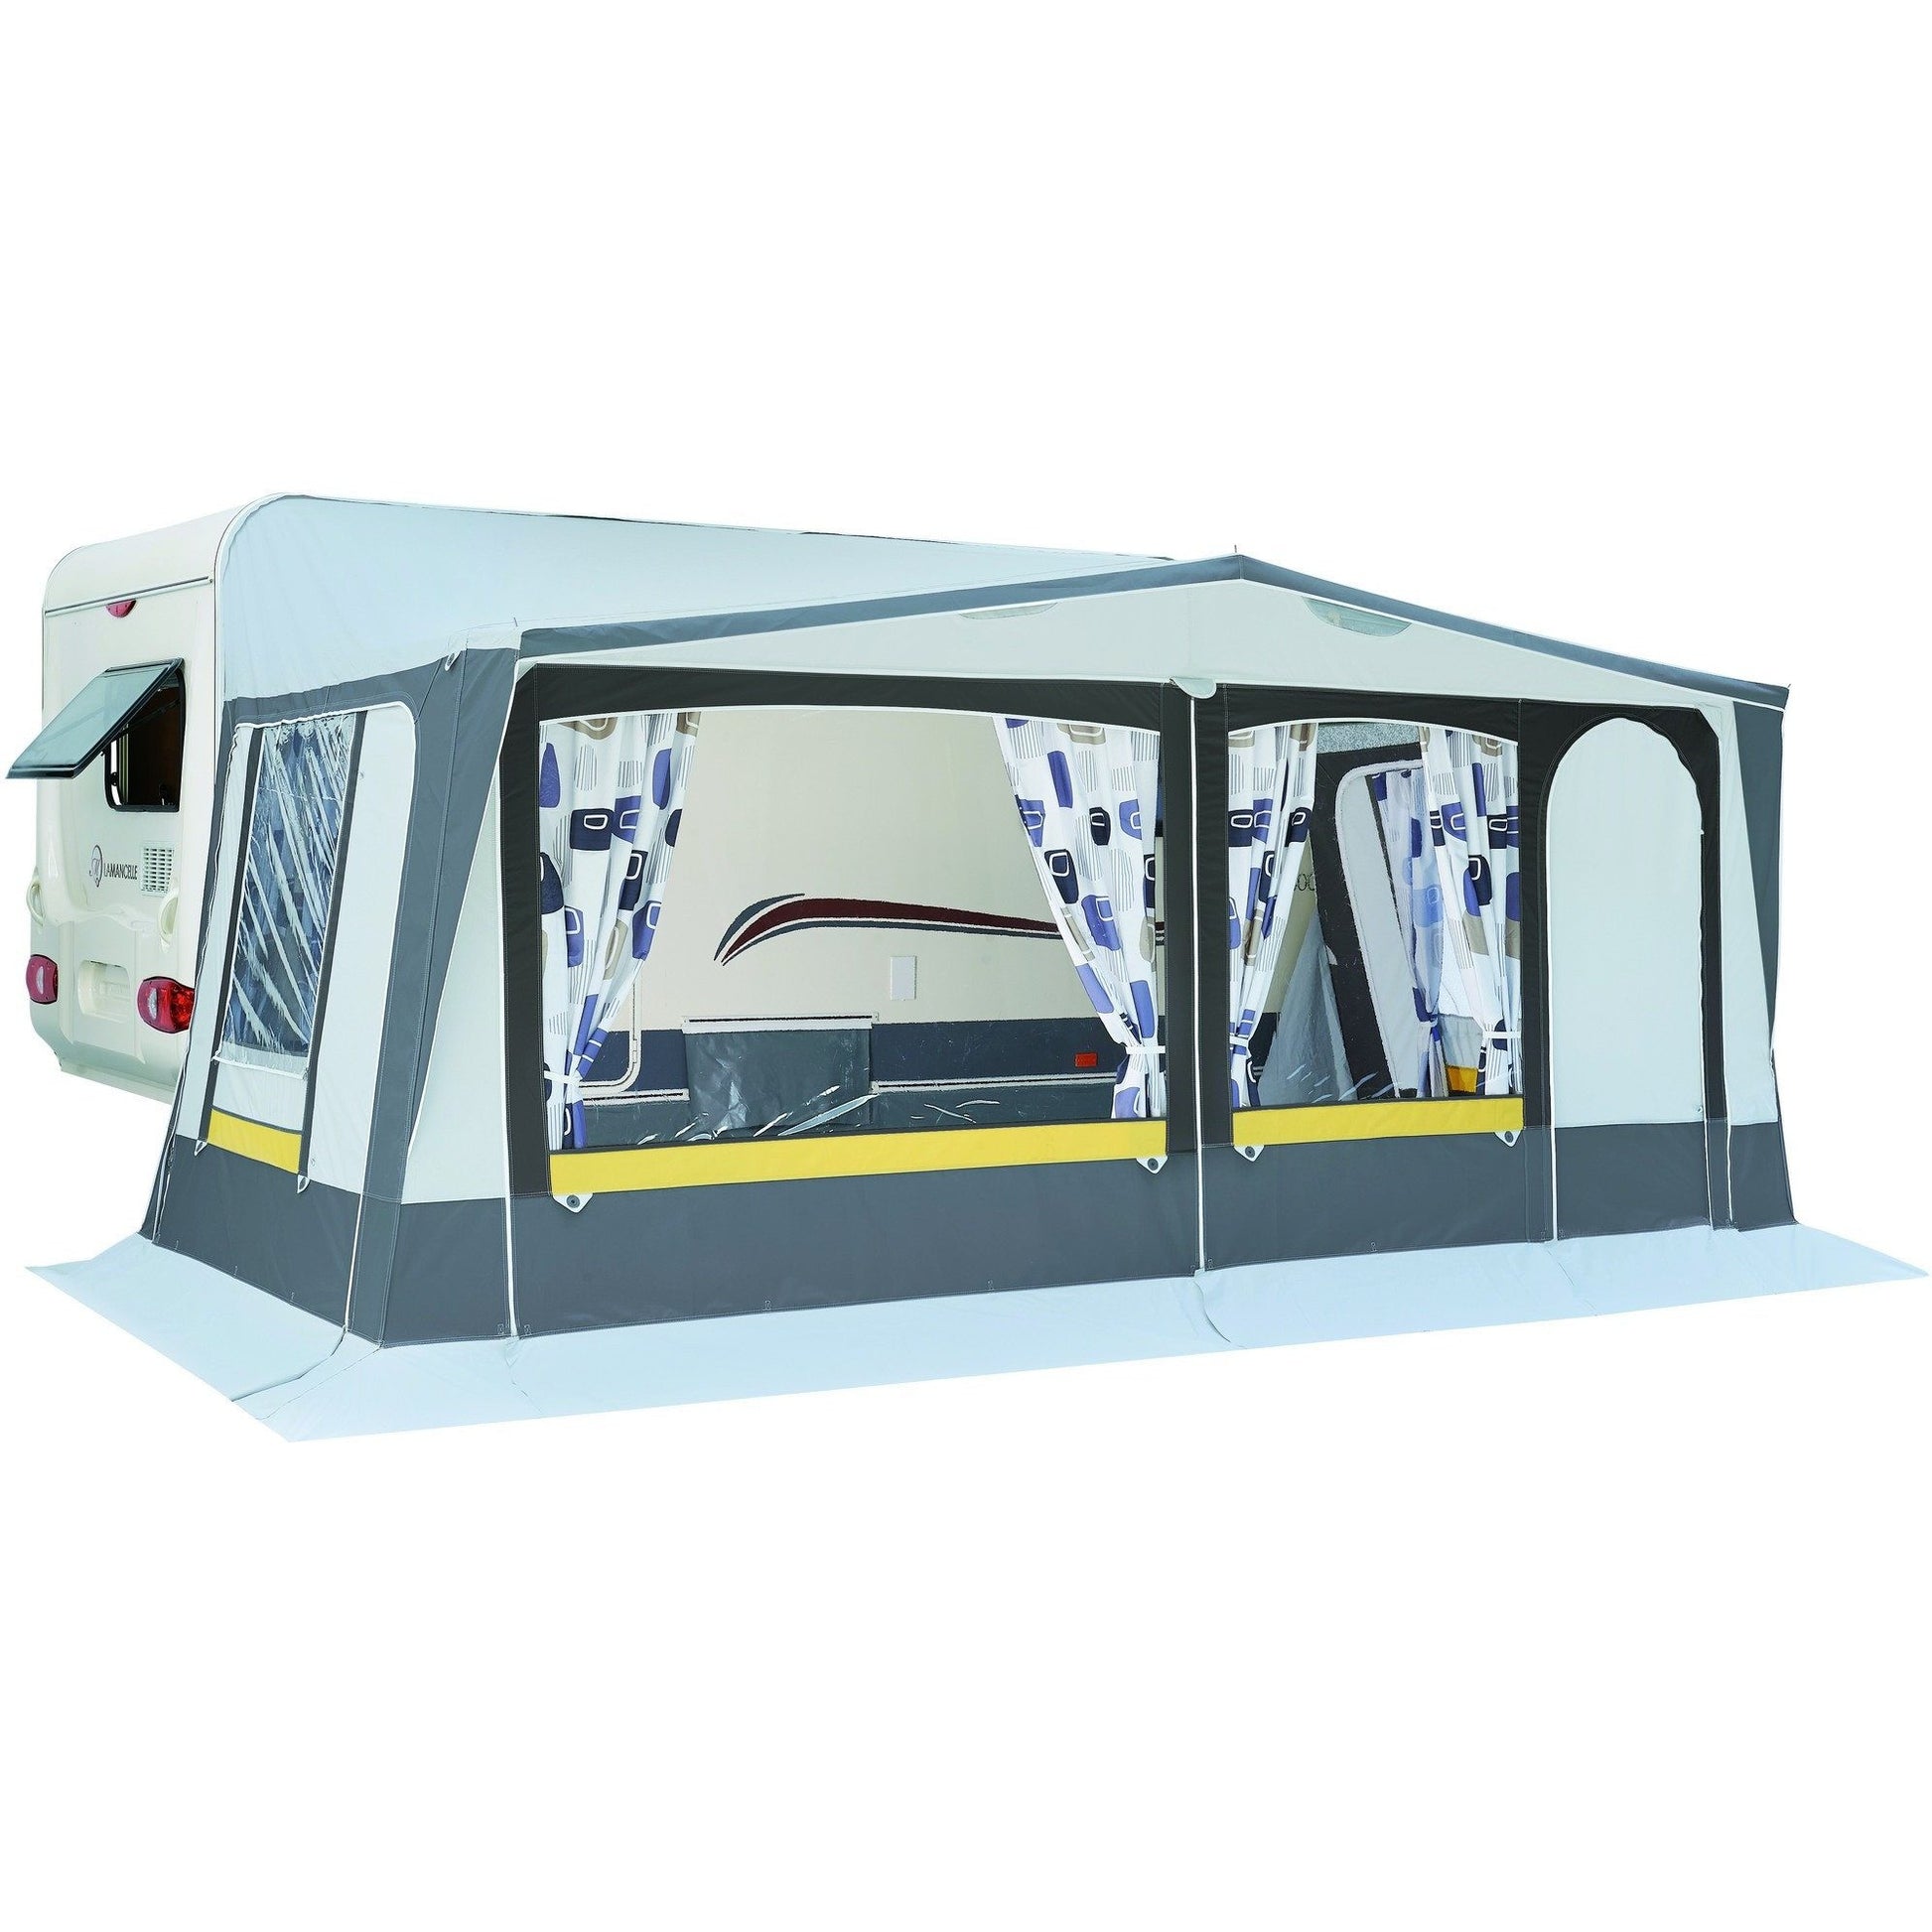 Exterior view of Trigano Adriatic Full Caravan Awning with door to the right